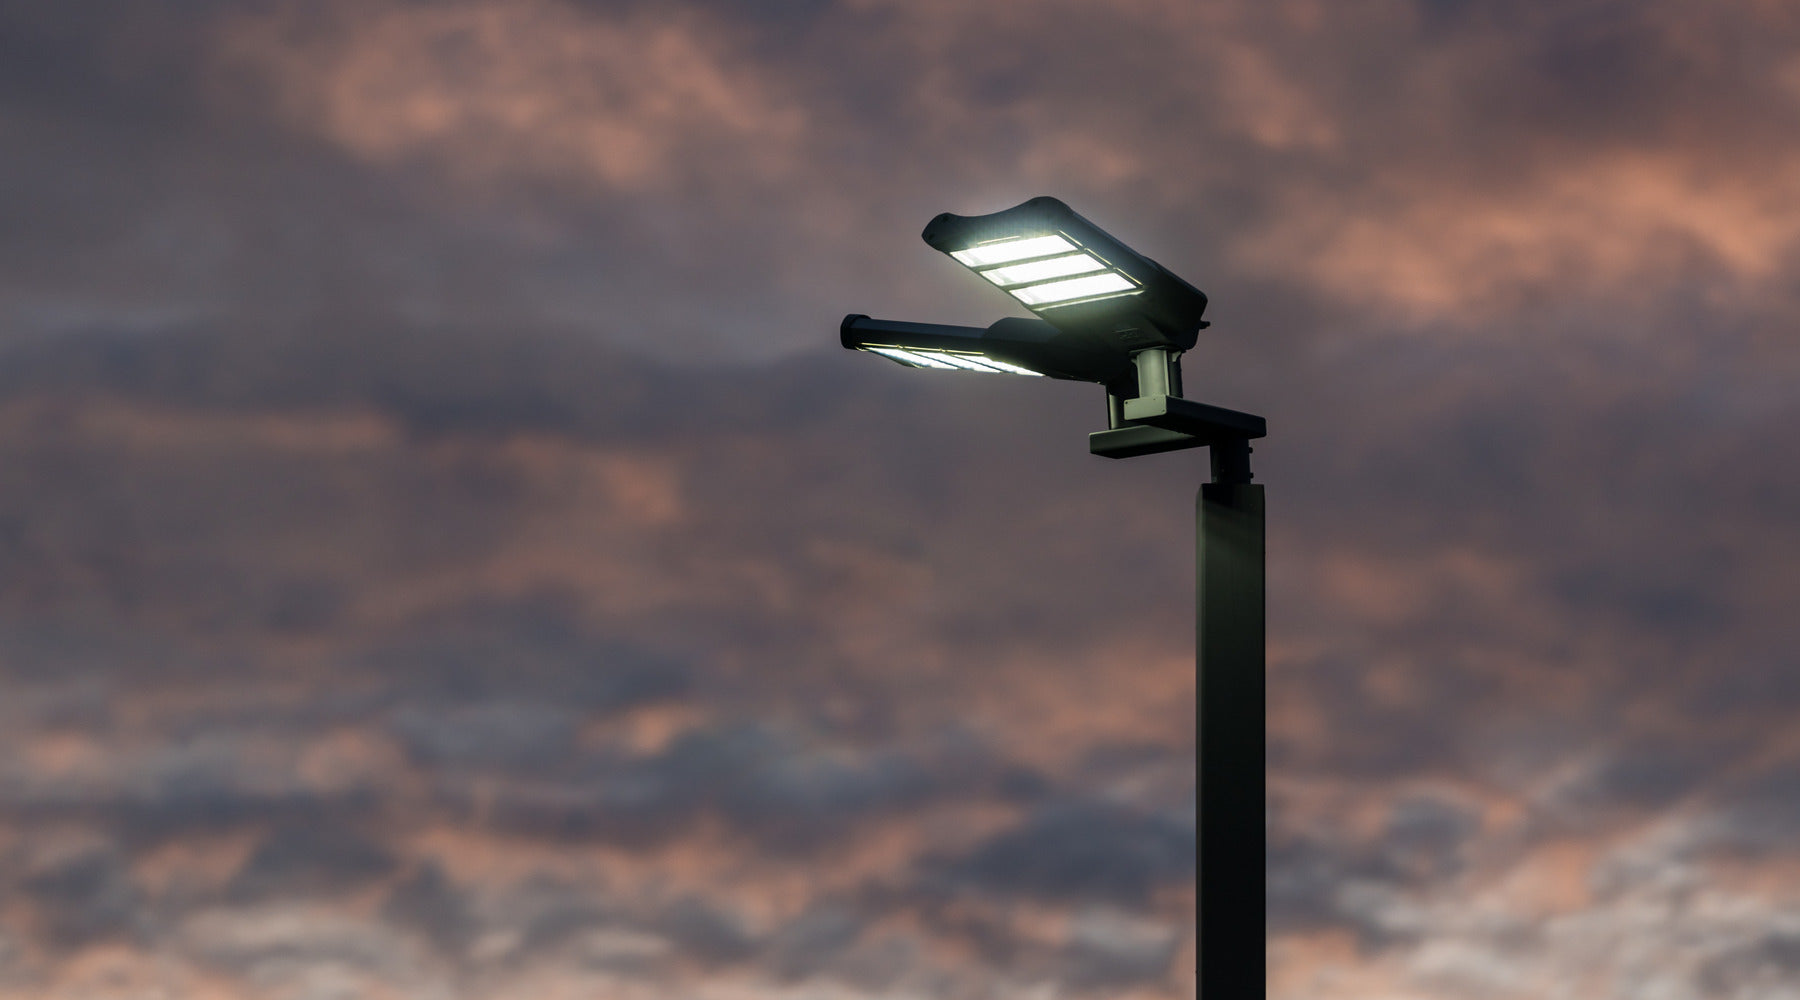 Flood lights shown mounted on top of pole during the morning twilight